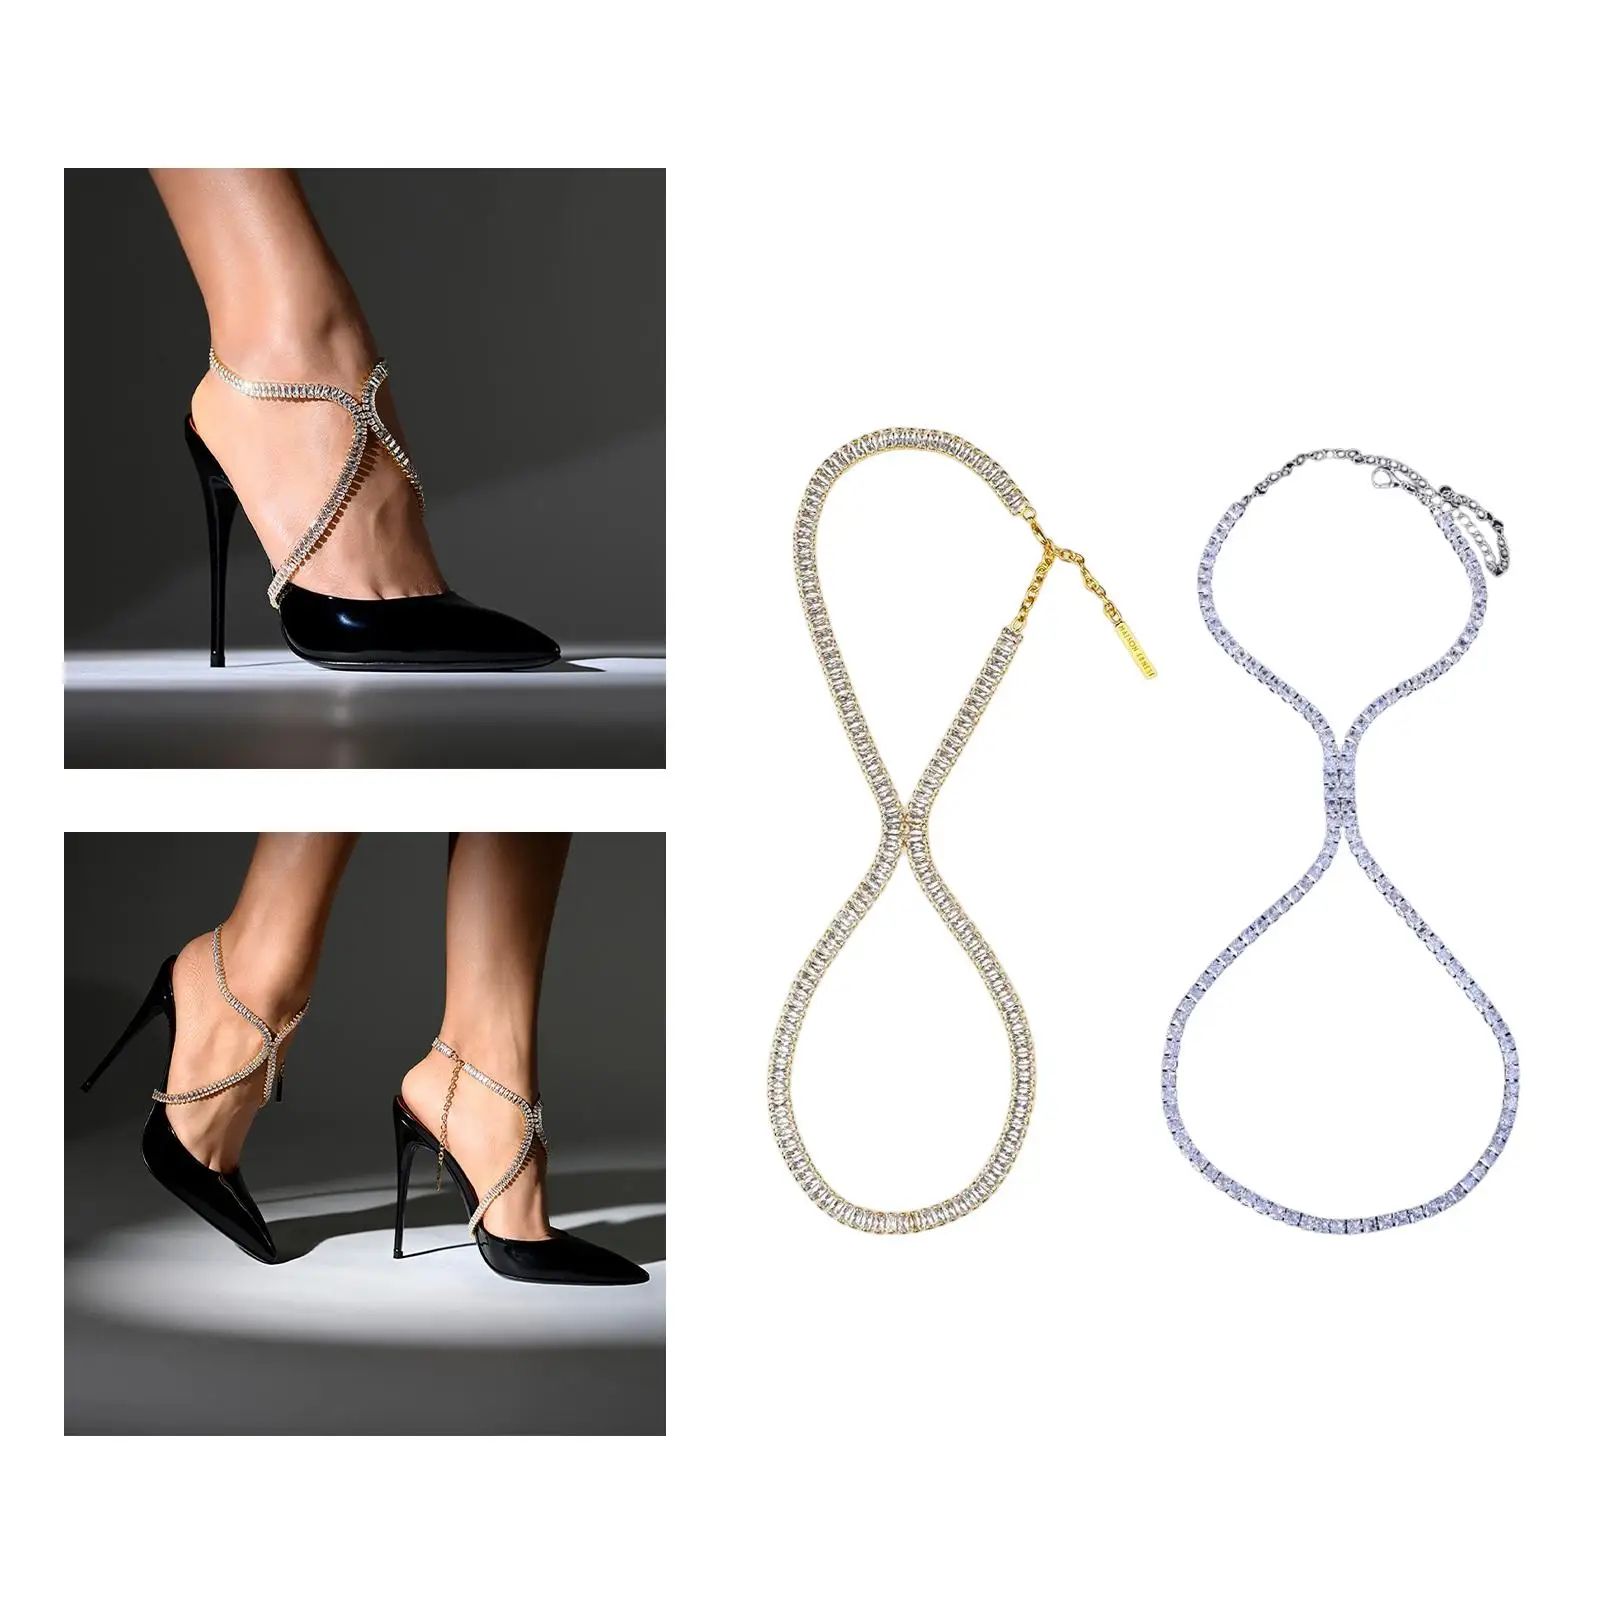 Crystal High Heel Anklet Jewelry for Sandals Accessories Wedding Women Girls